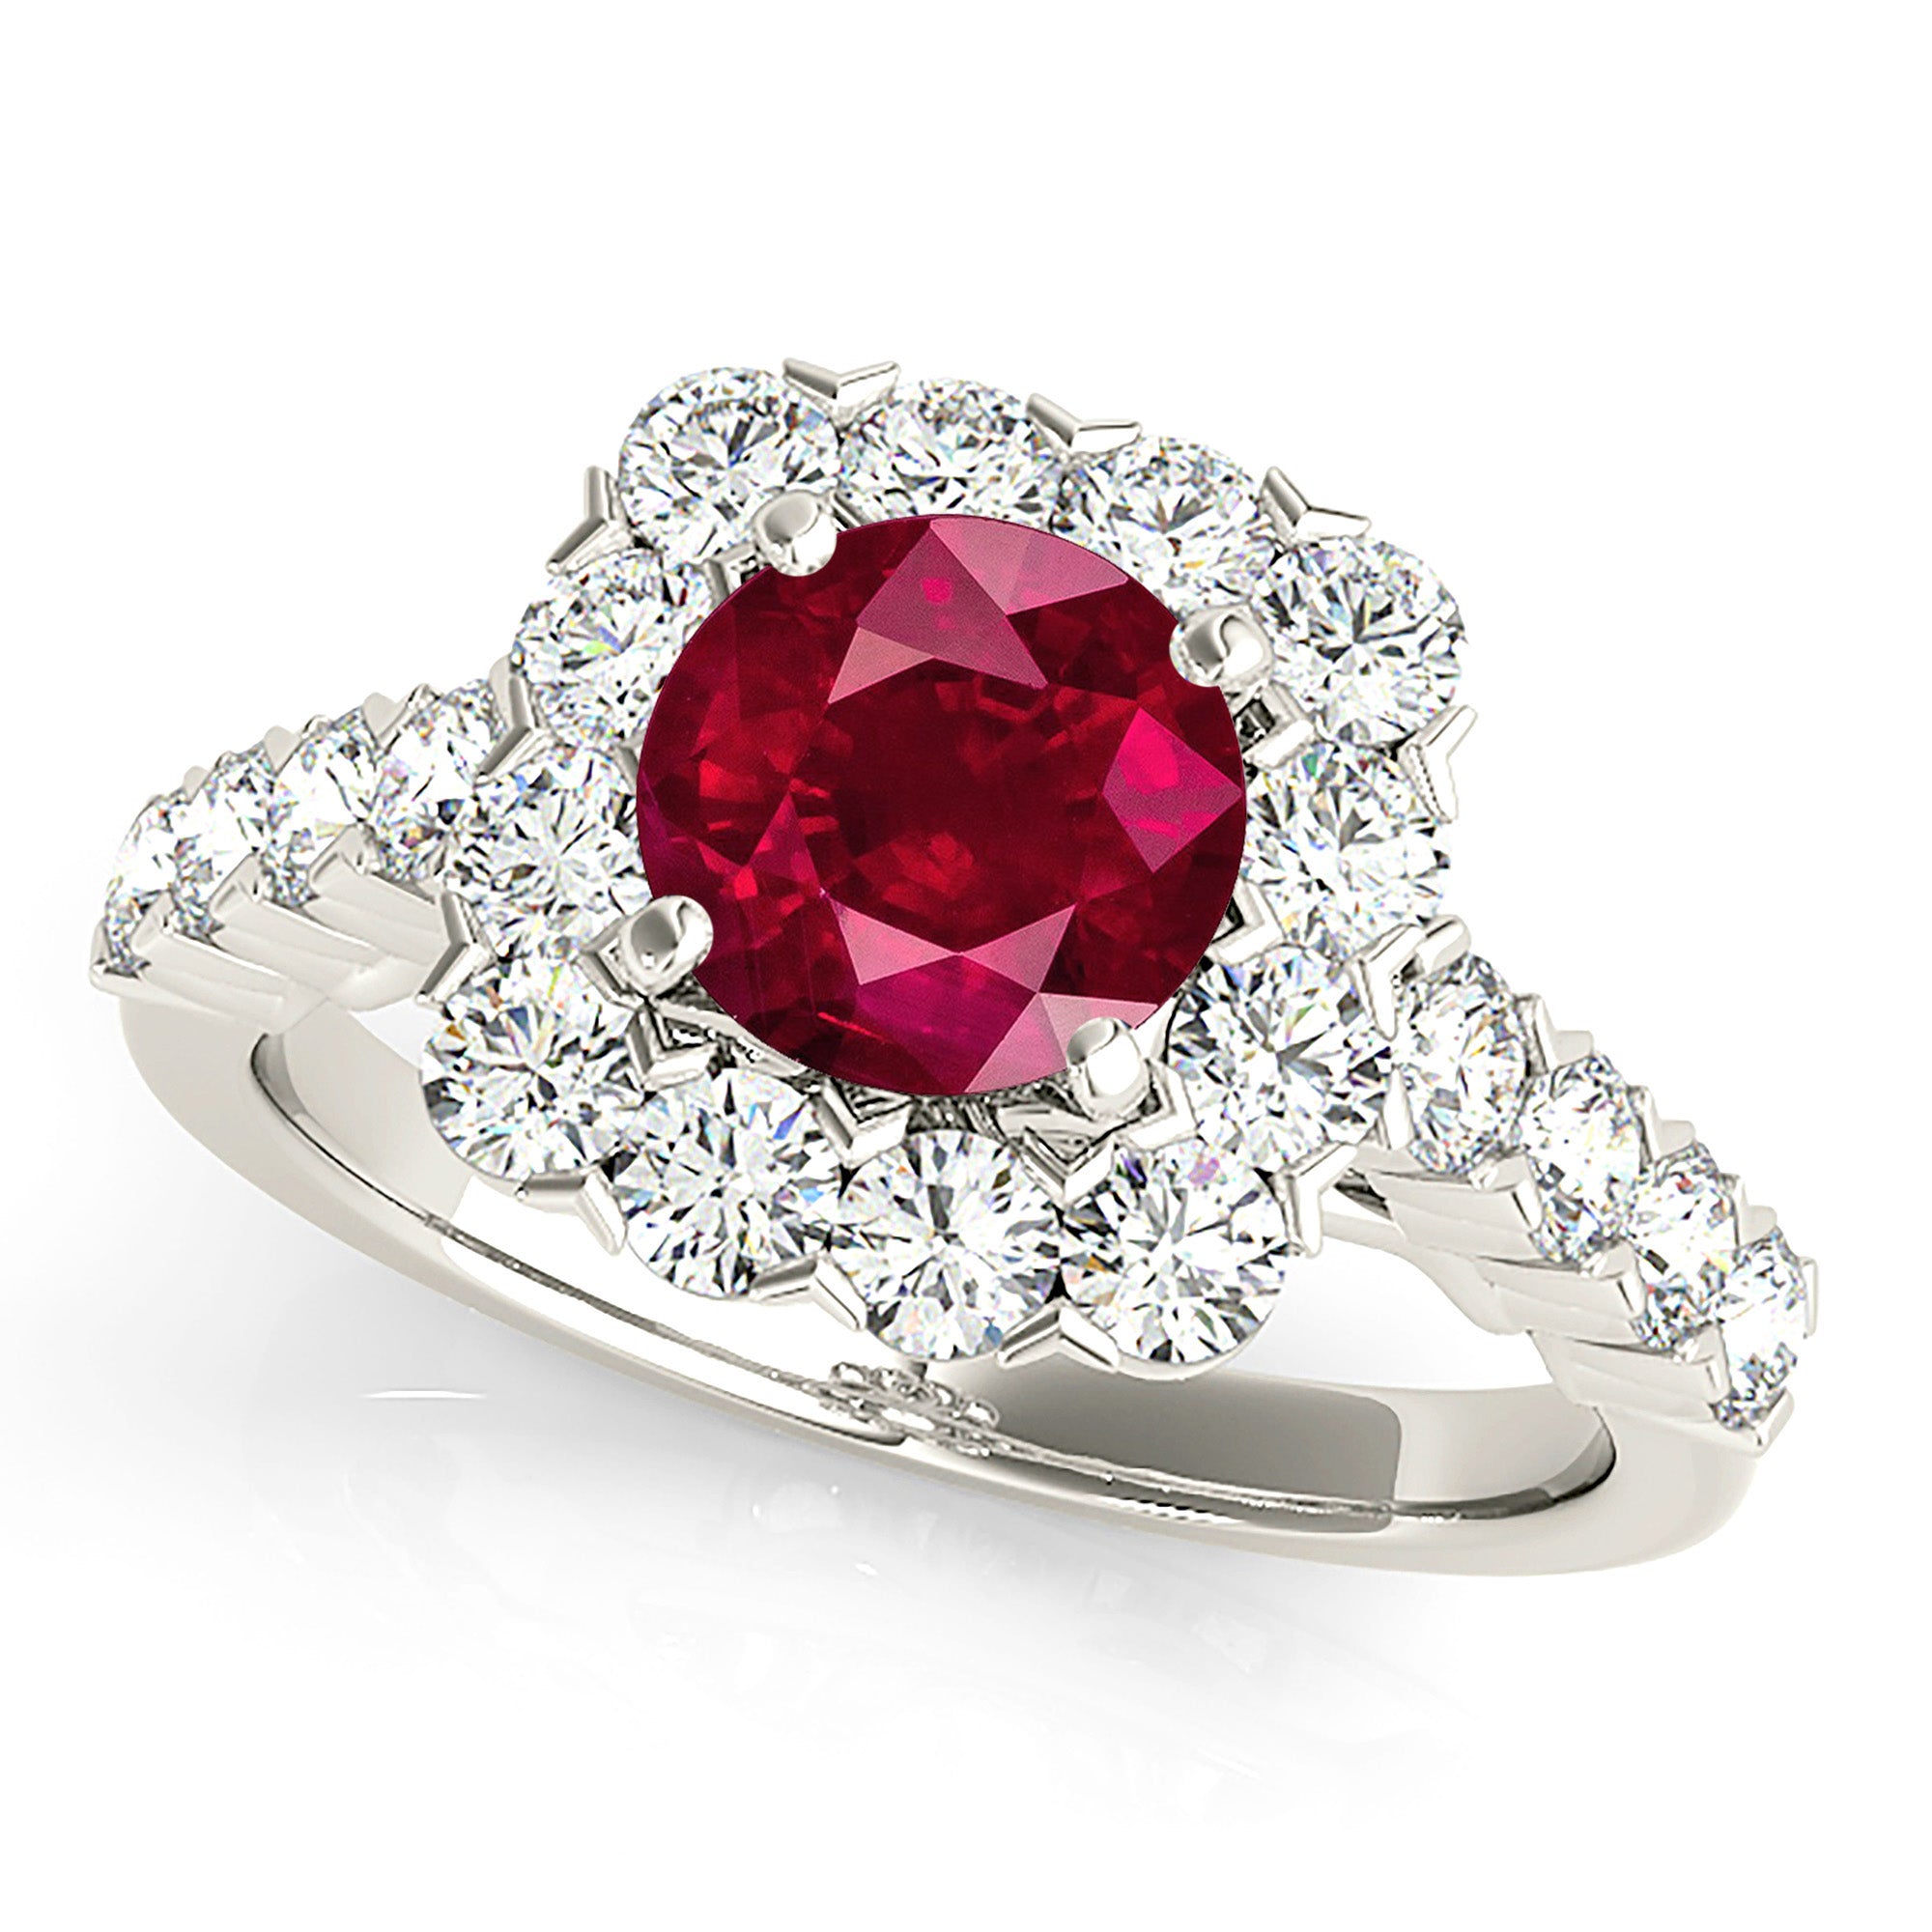 2.35 ct. Genuine Ruby Ring With 1.35 ctw. Diamond Cushion Halo And Scalloped Diamond Band-in 14K/18K White, Yellow, Rose Gold and Platinum - Christmas Jewelry Gift -VIRABYANI